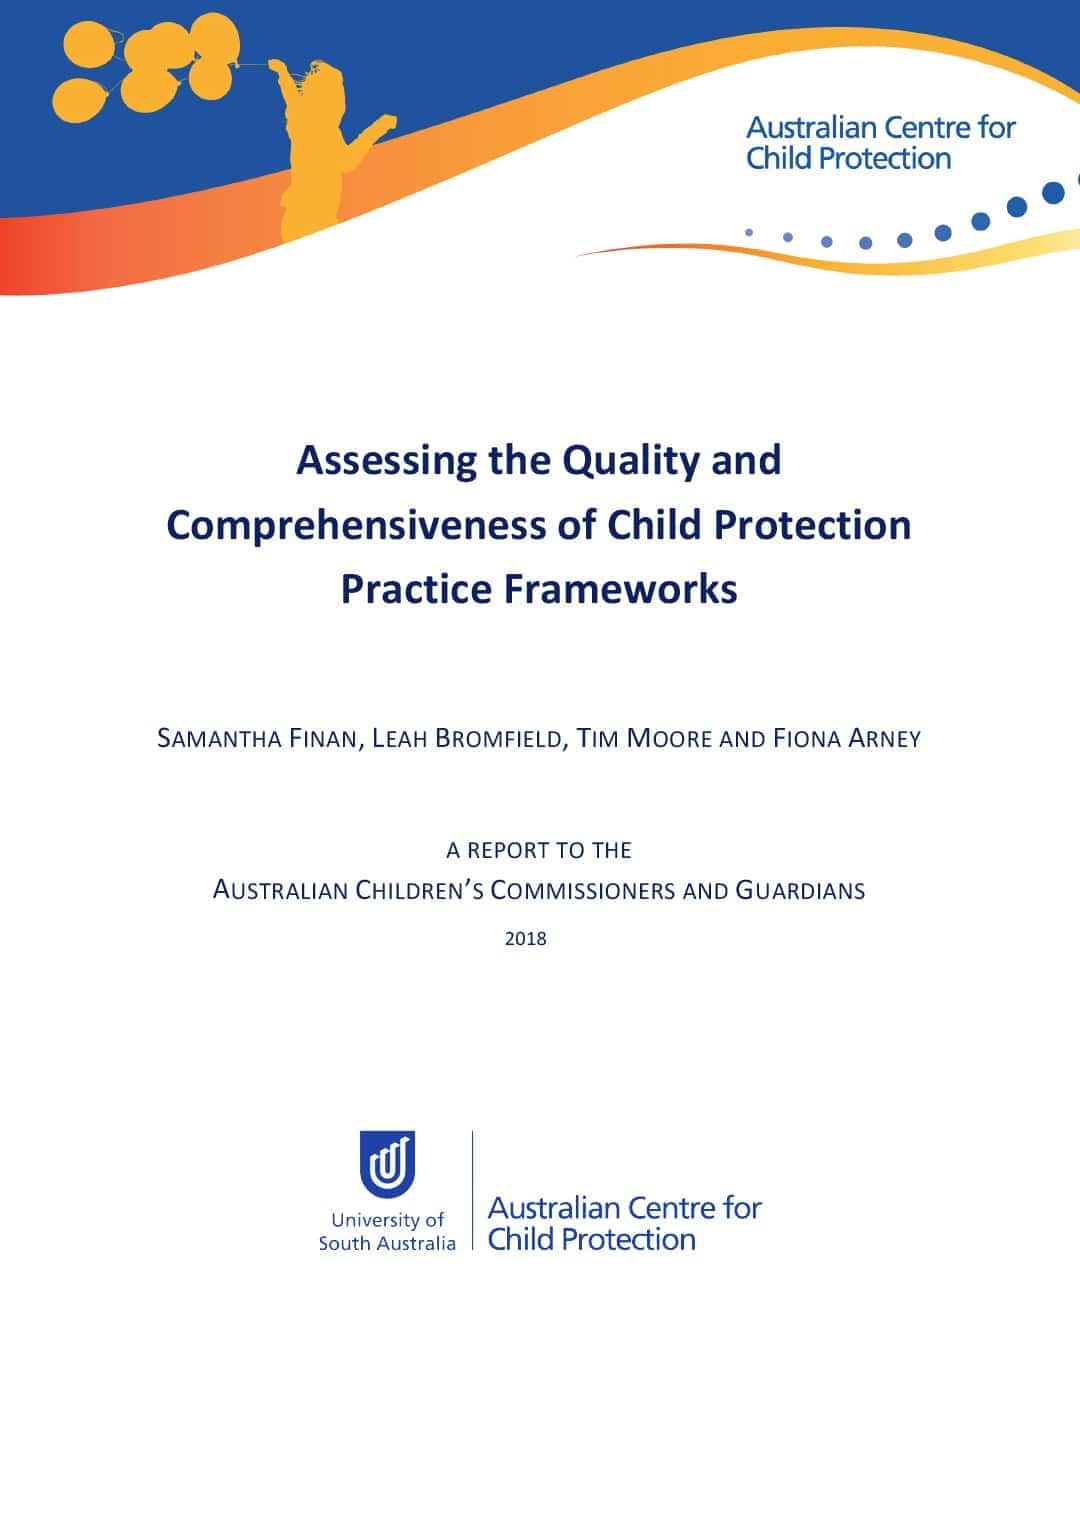 Assessing the Quality and Comprehensiveness of Child Protection Practice Frameworks